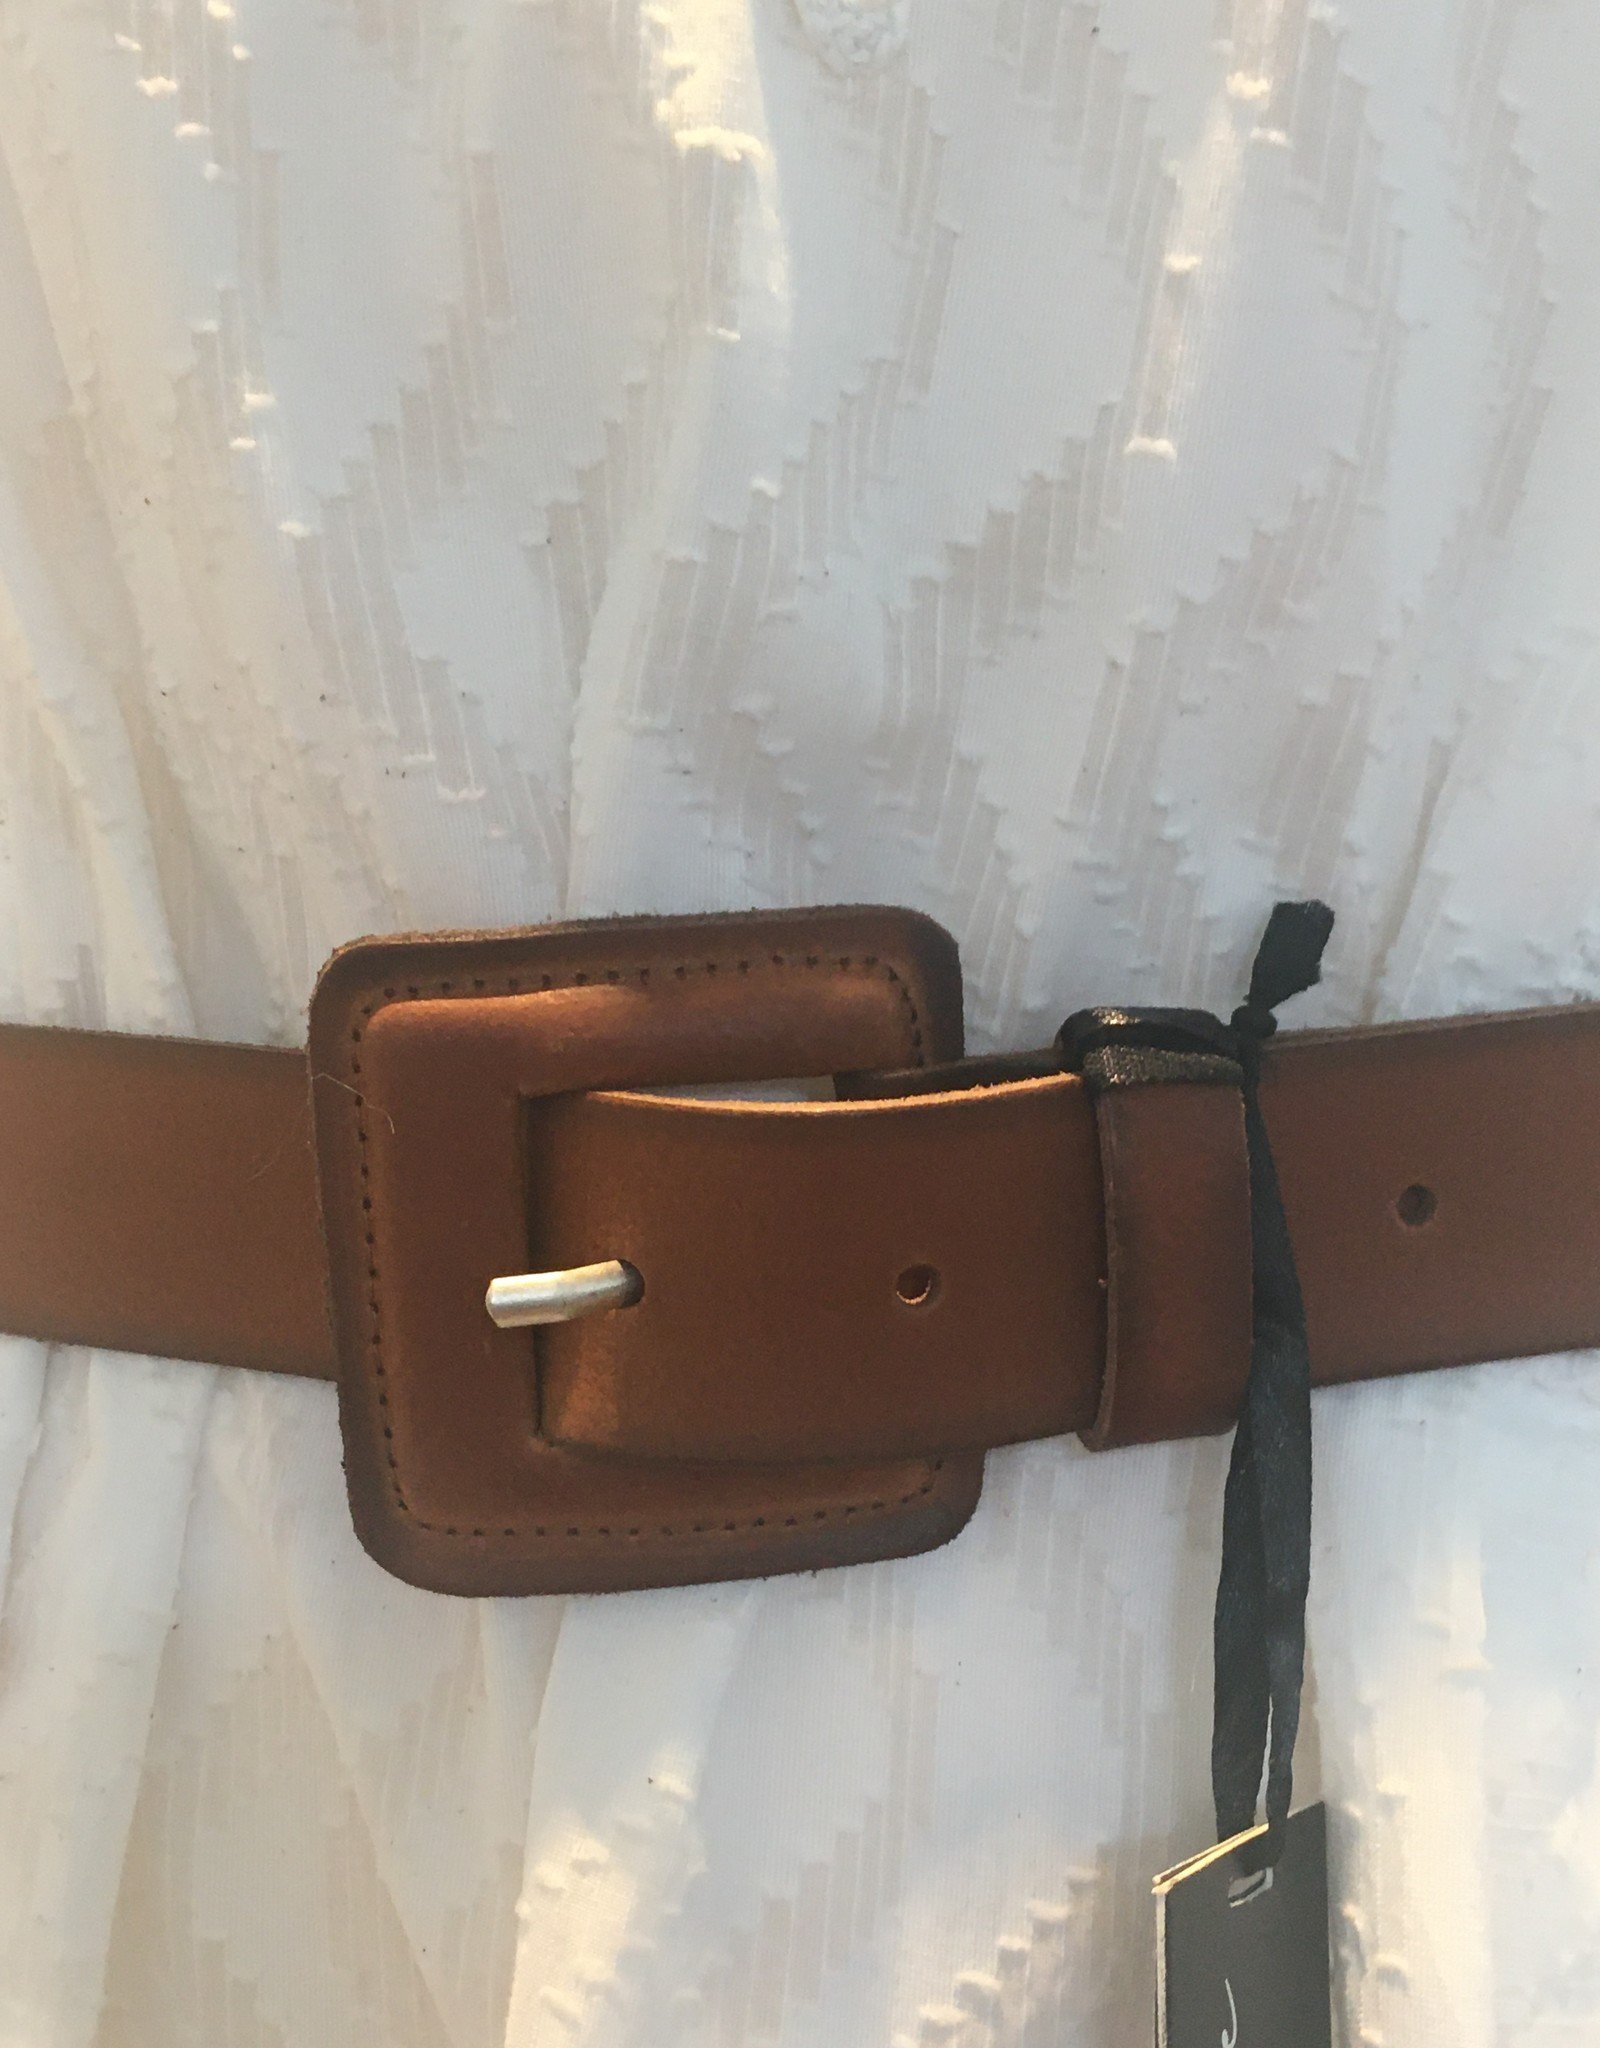 Wide leather belt with buckle in the same leather